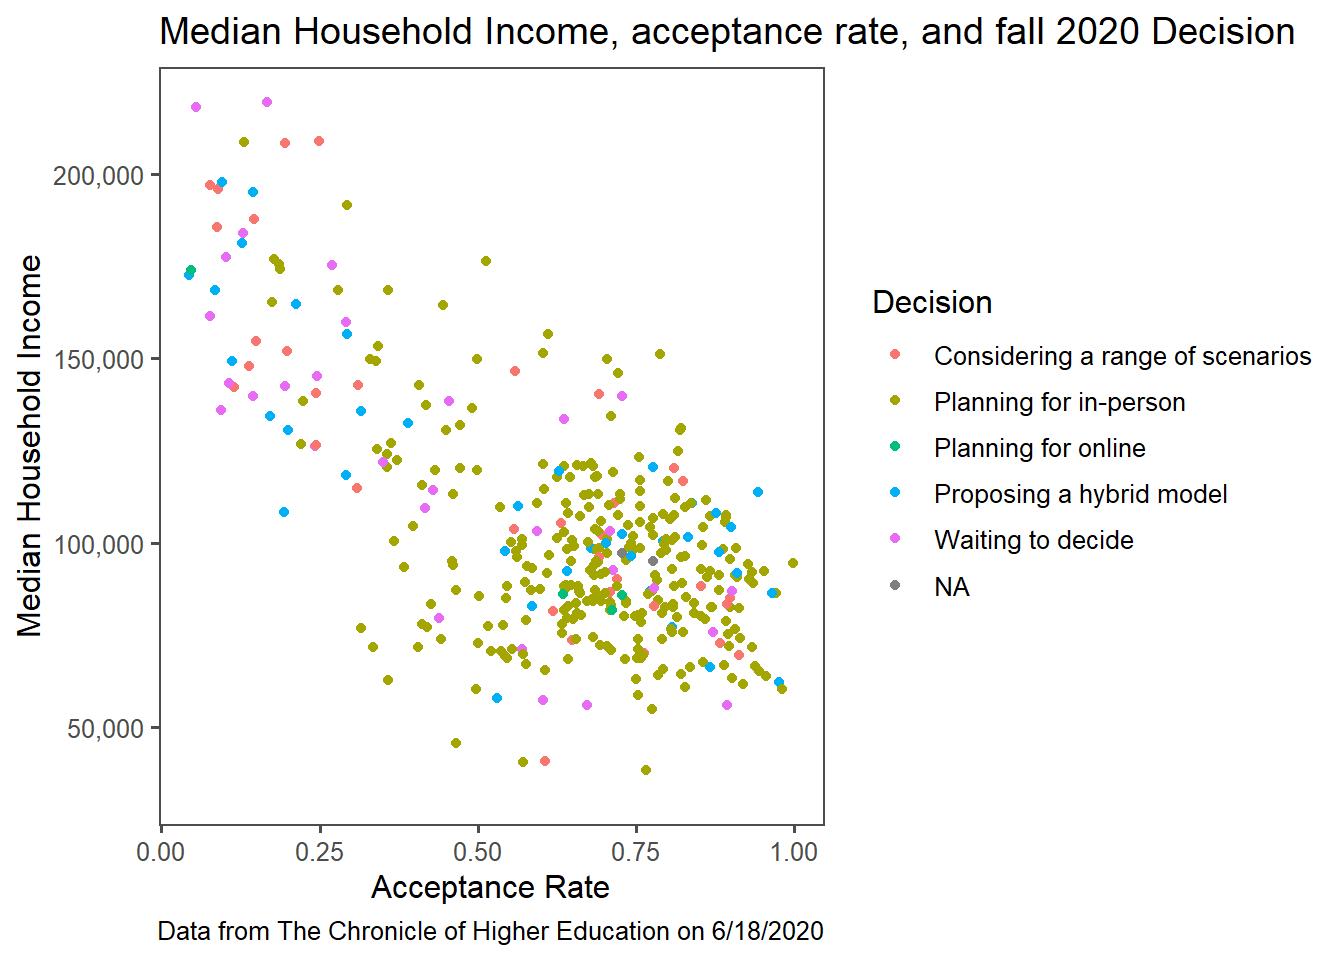 Caption: Fall descision compared to a school's median household income and acceptance rate